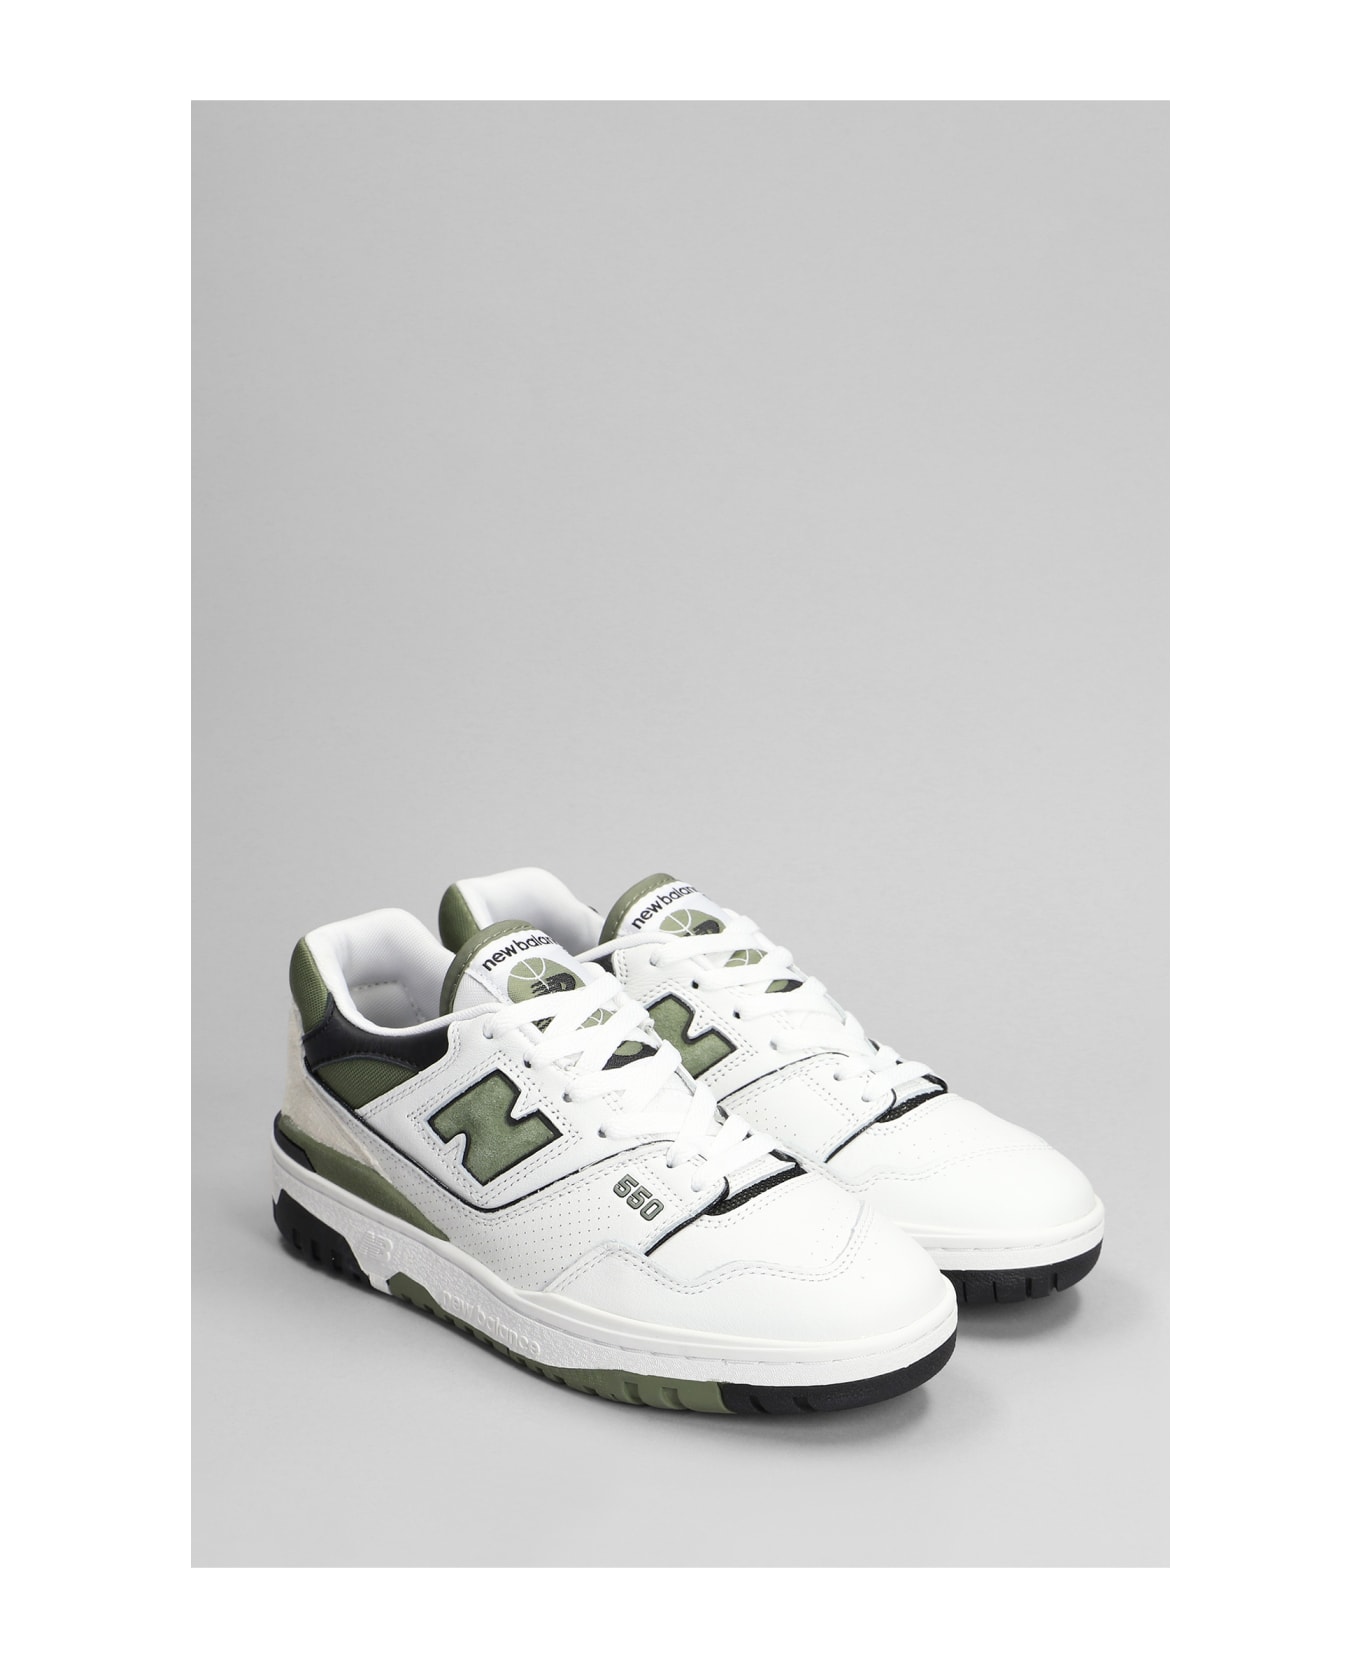 New Balance 550 Sneakers In White Leather - white スニーカー